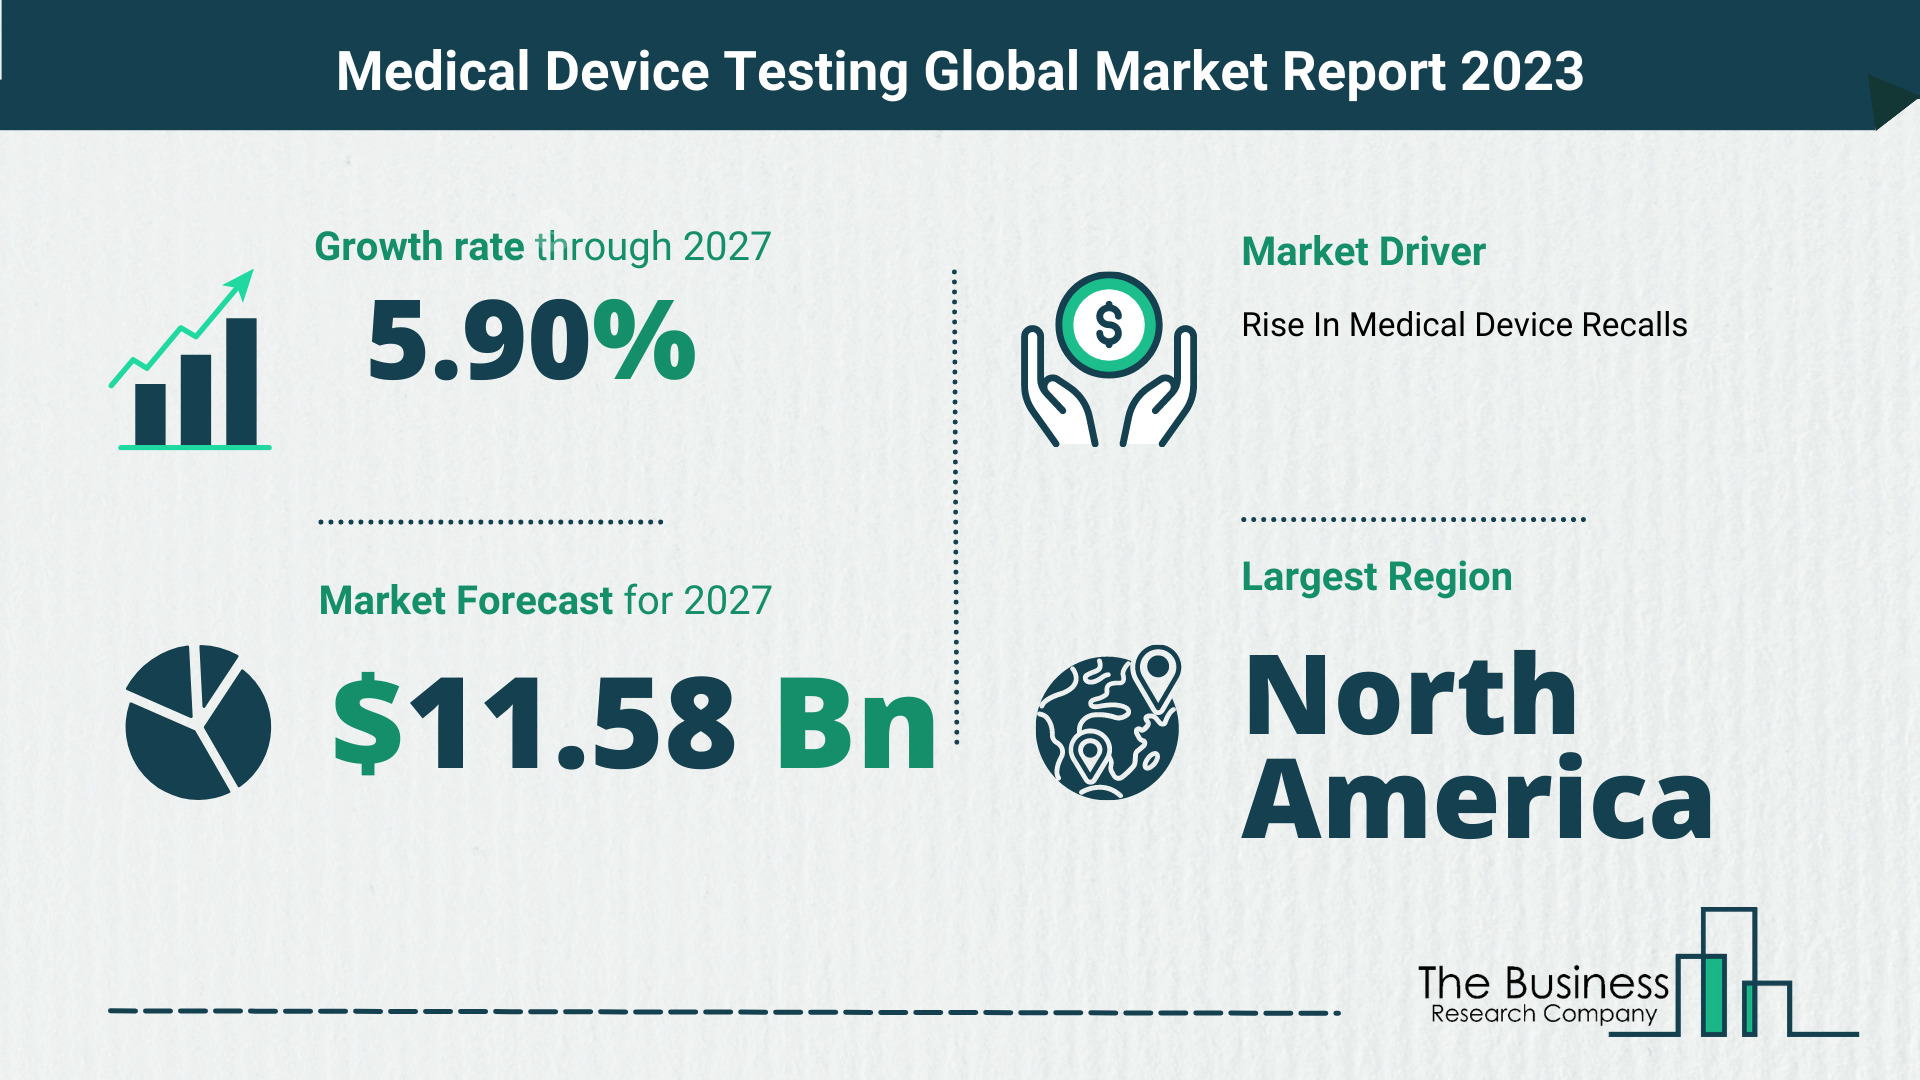 Global Medical Device Testing Market Opportunities And Strategies 2023